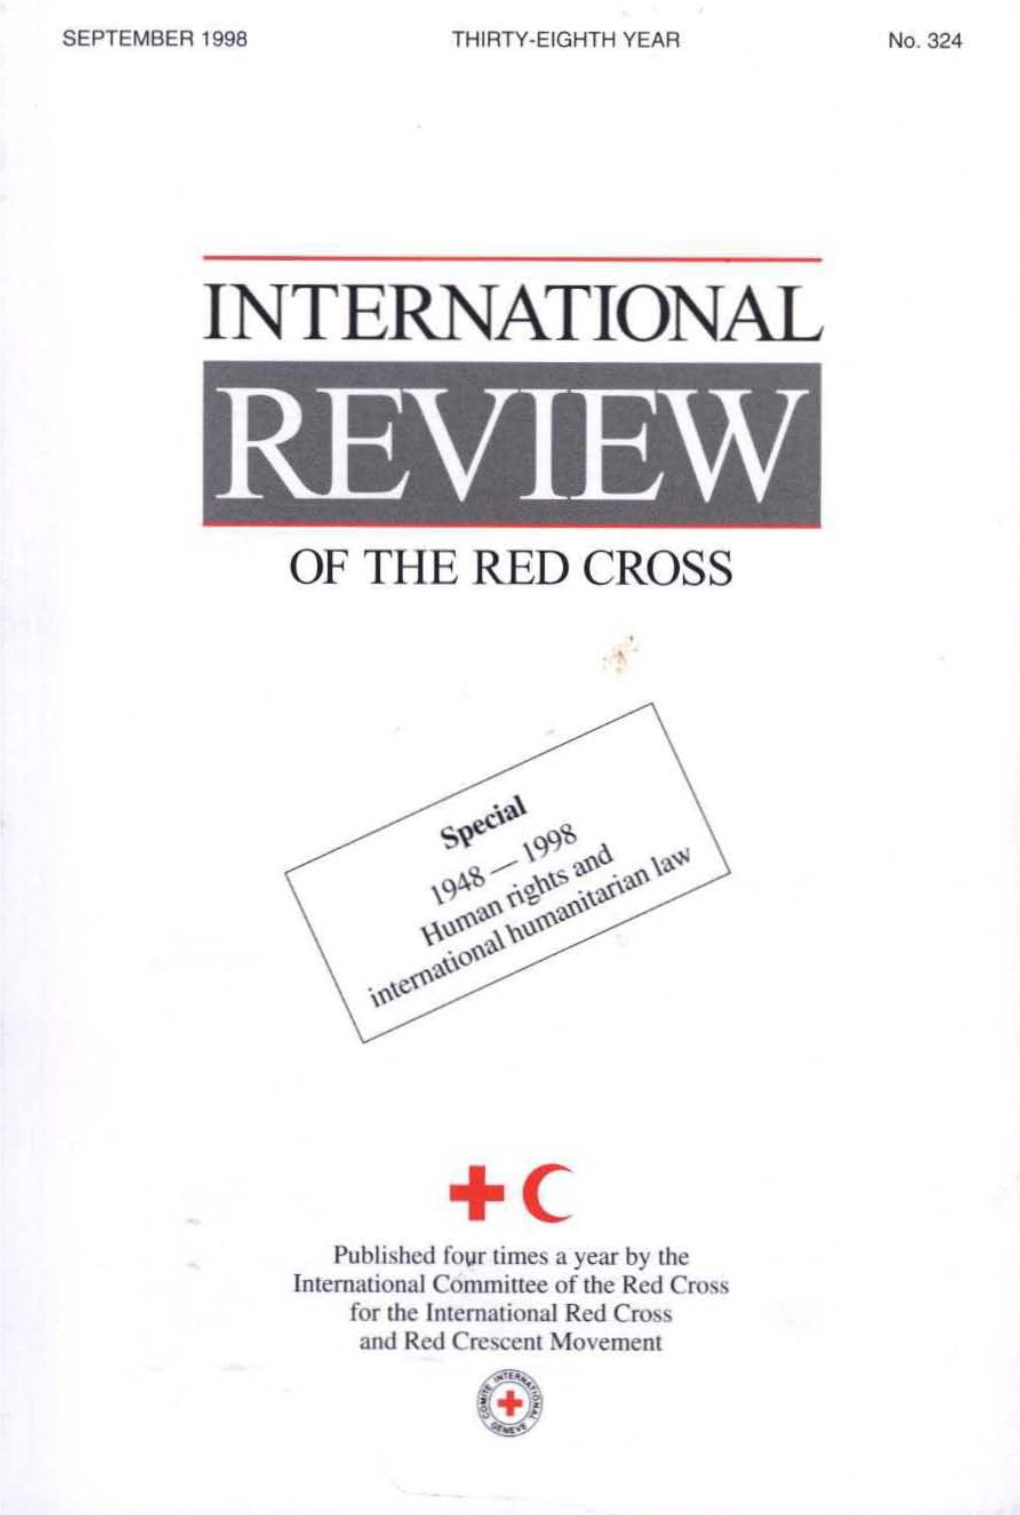 International Review of the Red Cross, October 1998, Thirty-Eigth Year